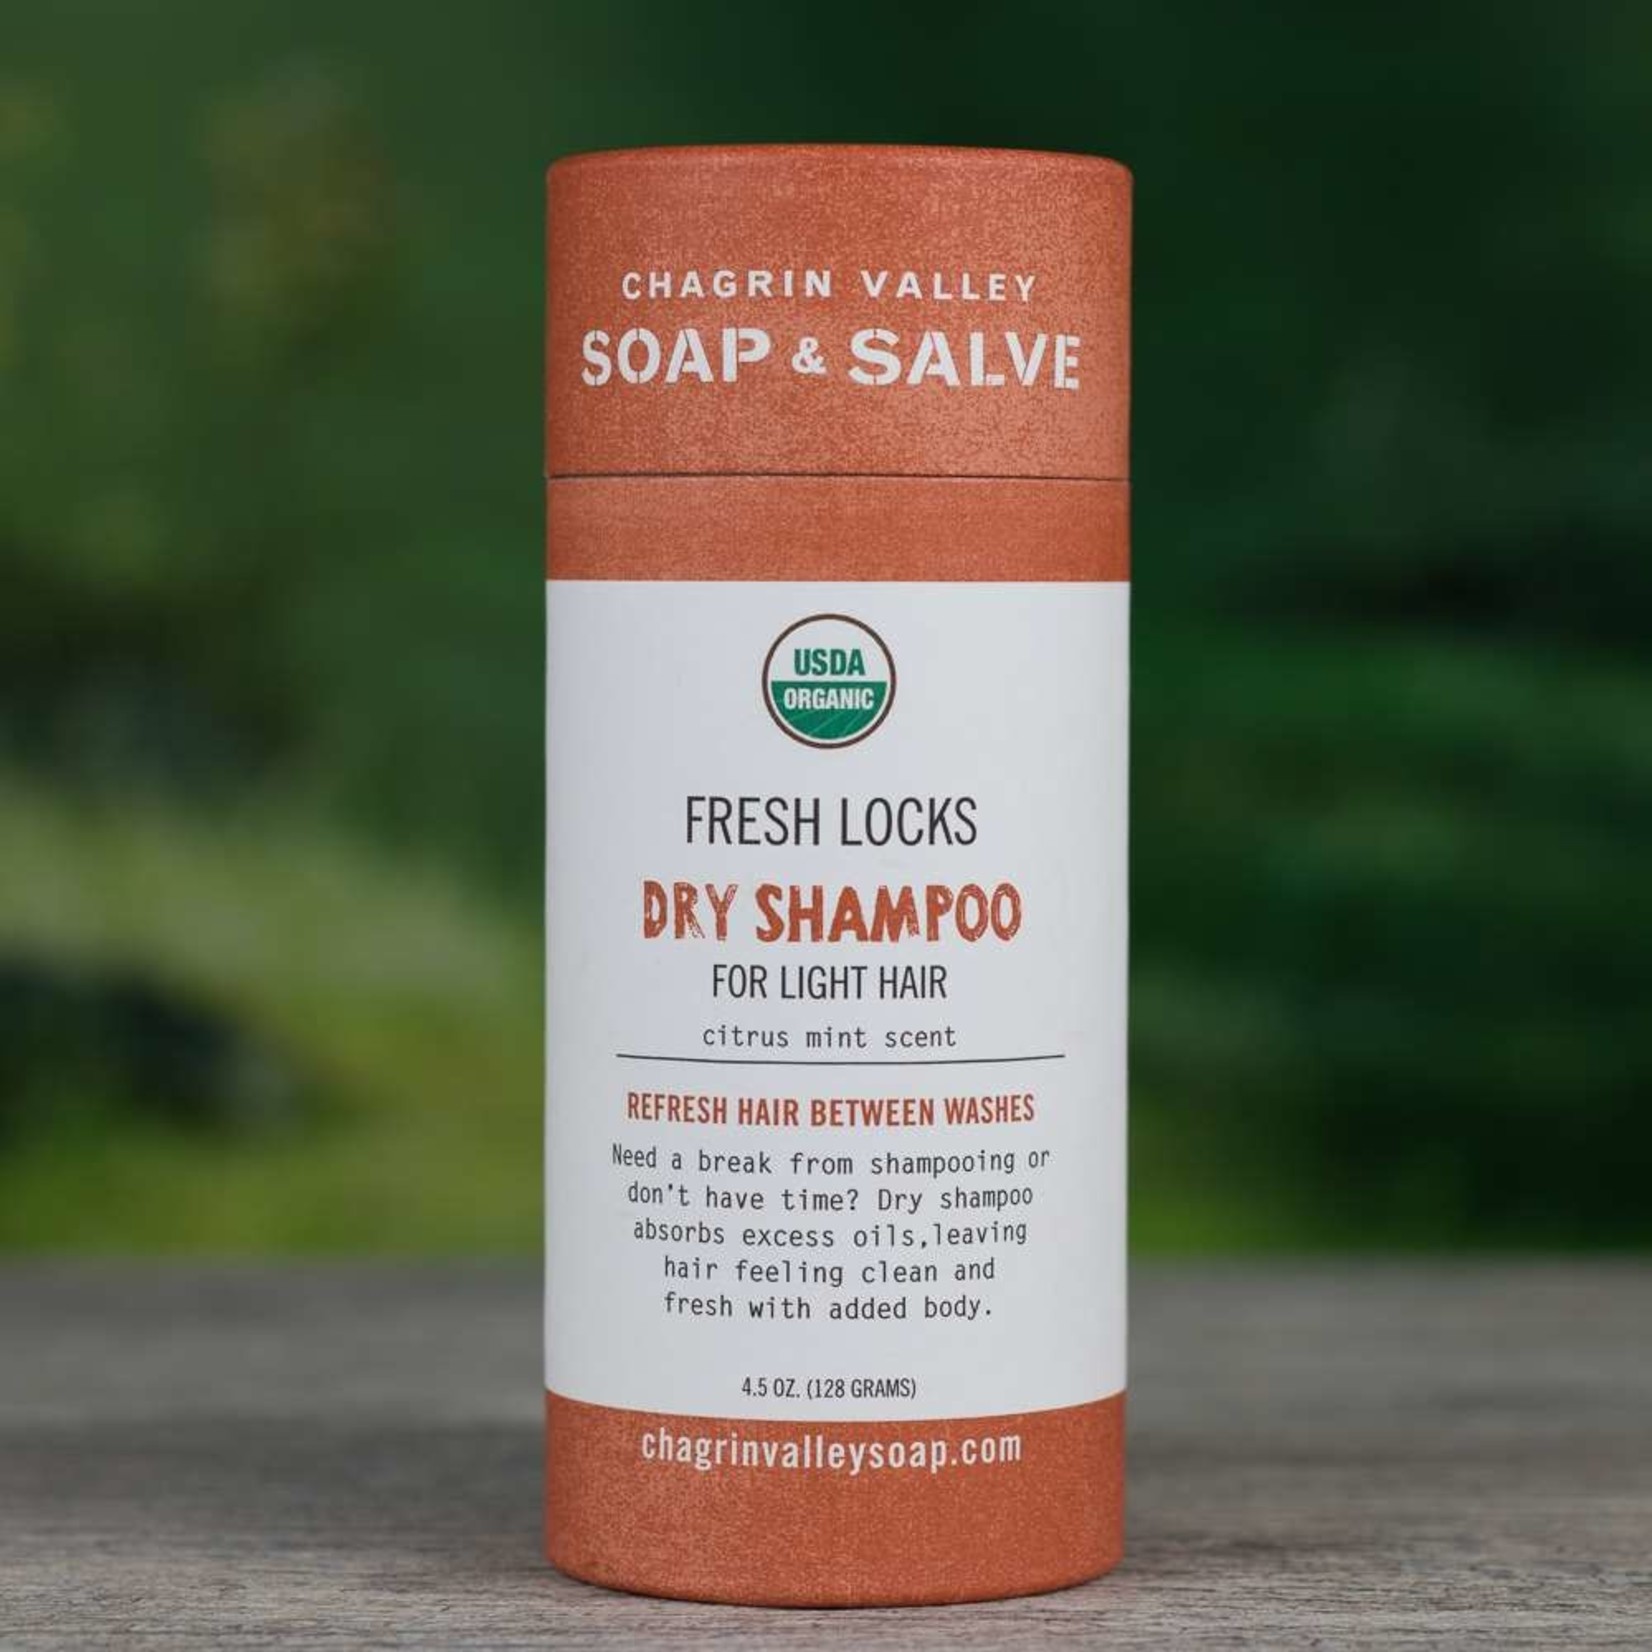 Chagrin Valley Soap and Salve Organic Citrus Mint Dry Shampoo for Light Hair